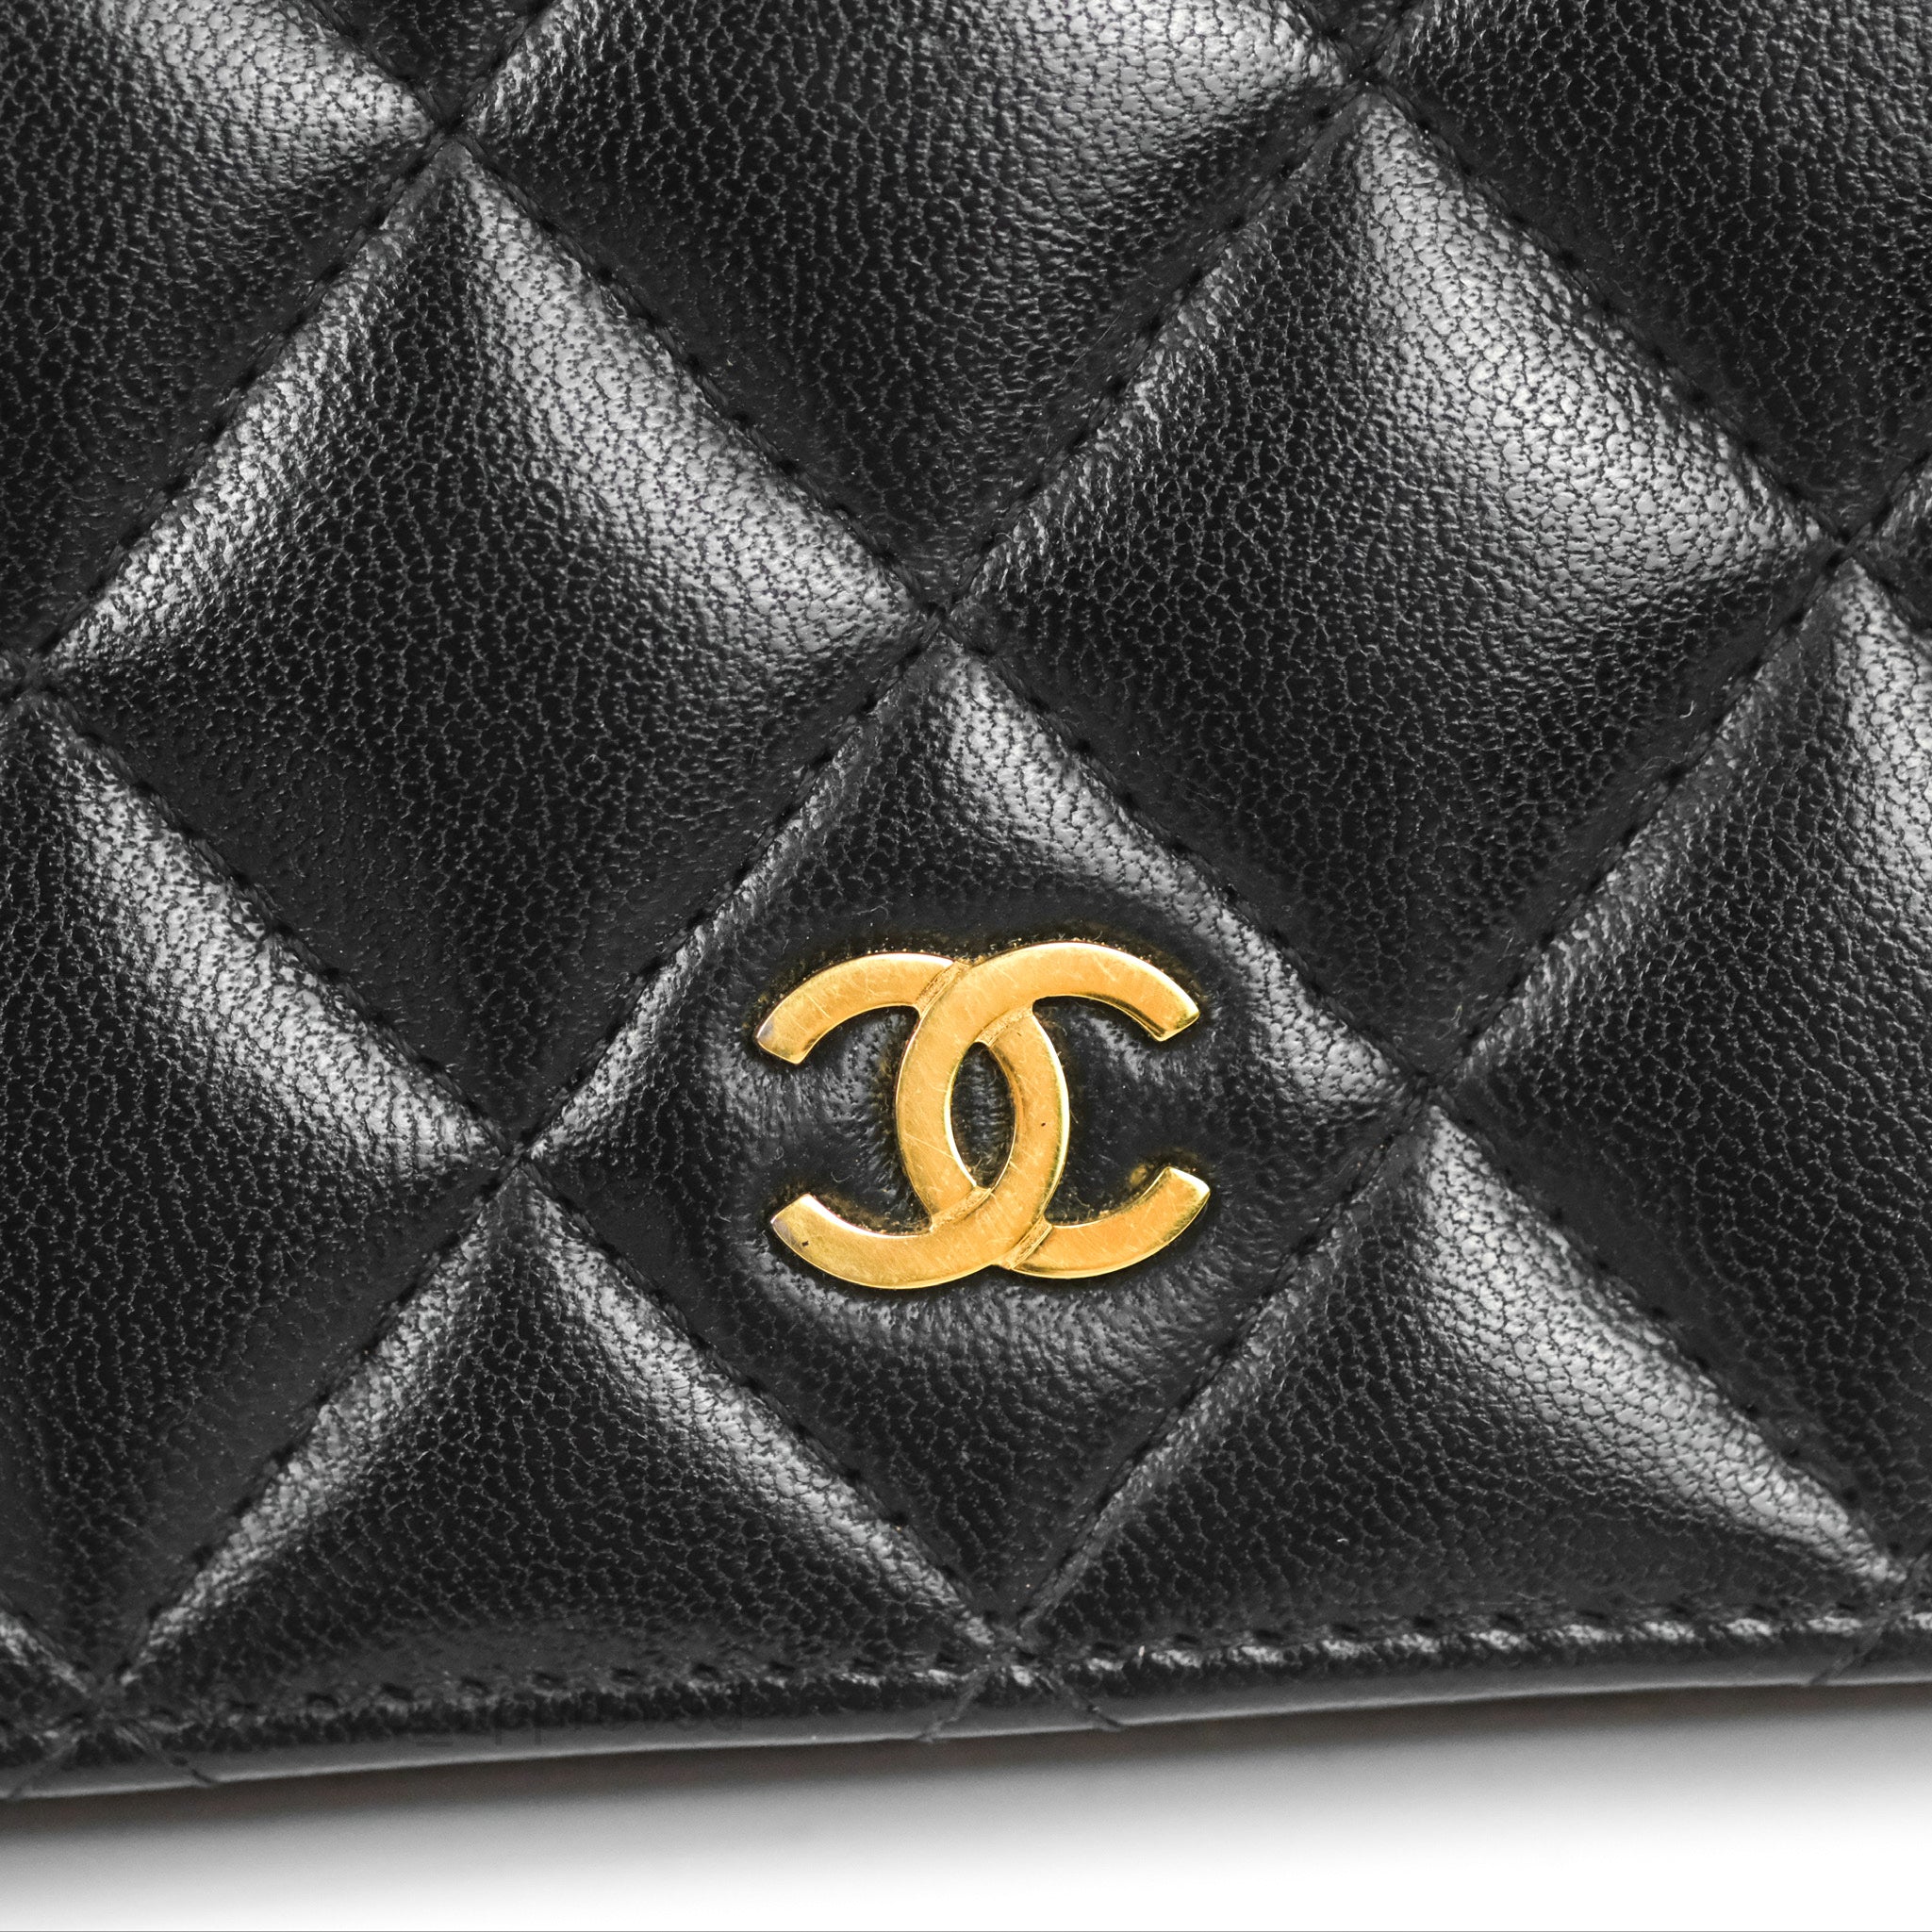 Chanel So Black Quilted Caviar Zip-Around Coin Purse Wallet